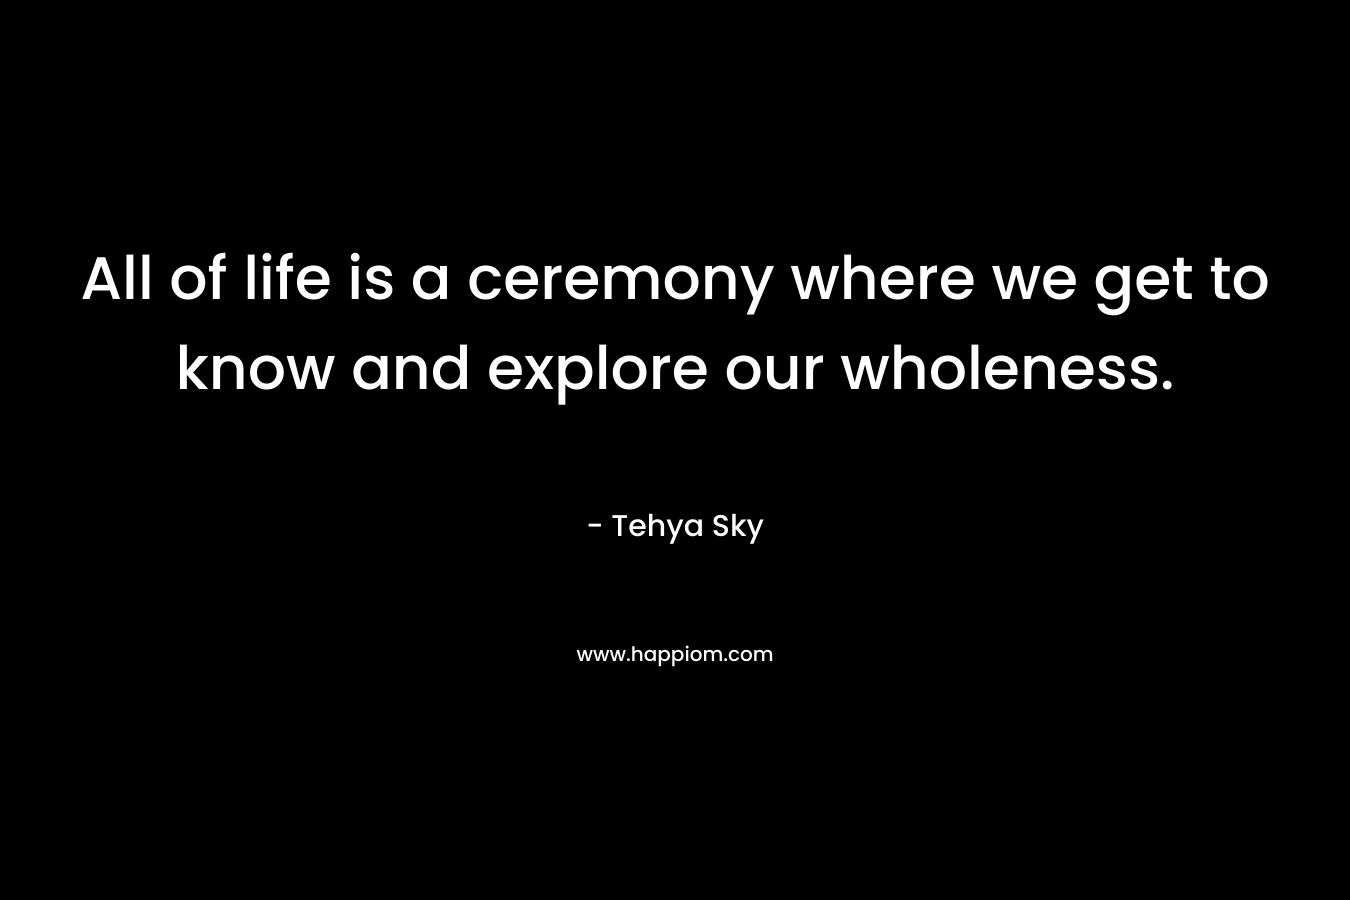 All of life is a ceremony where we get to know and explore our wholeness.